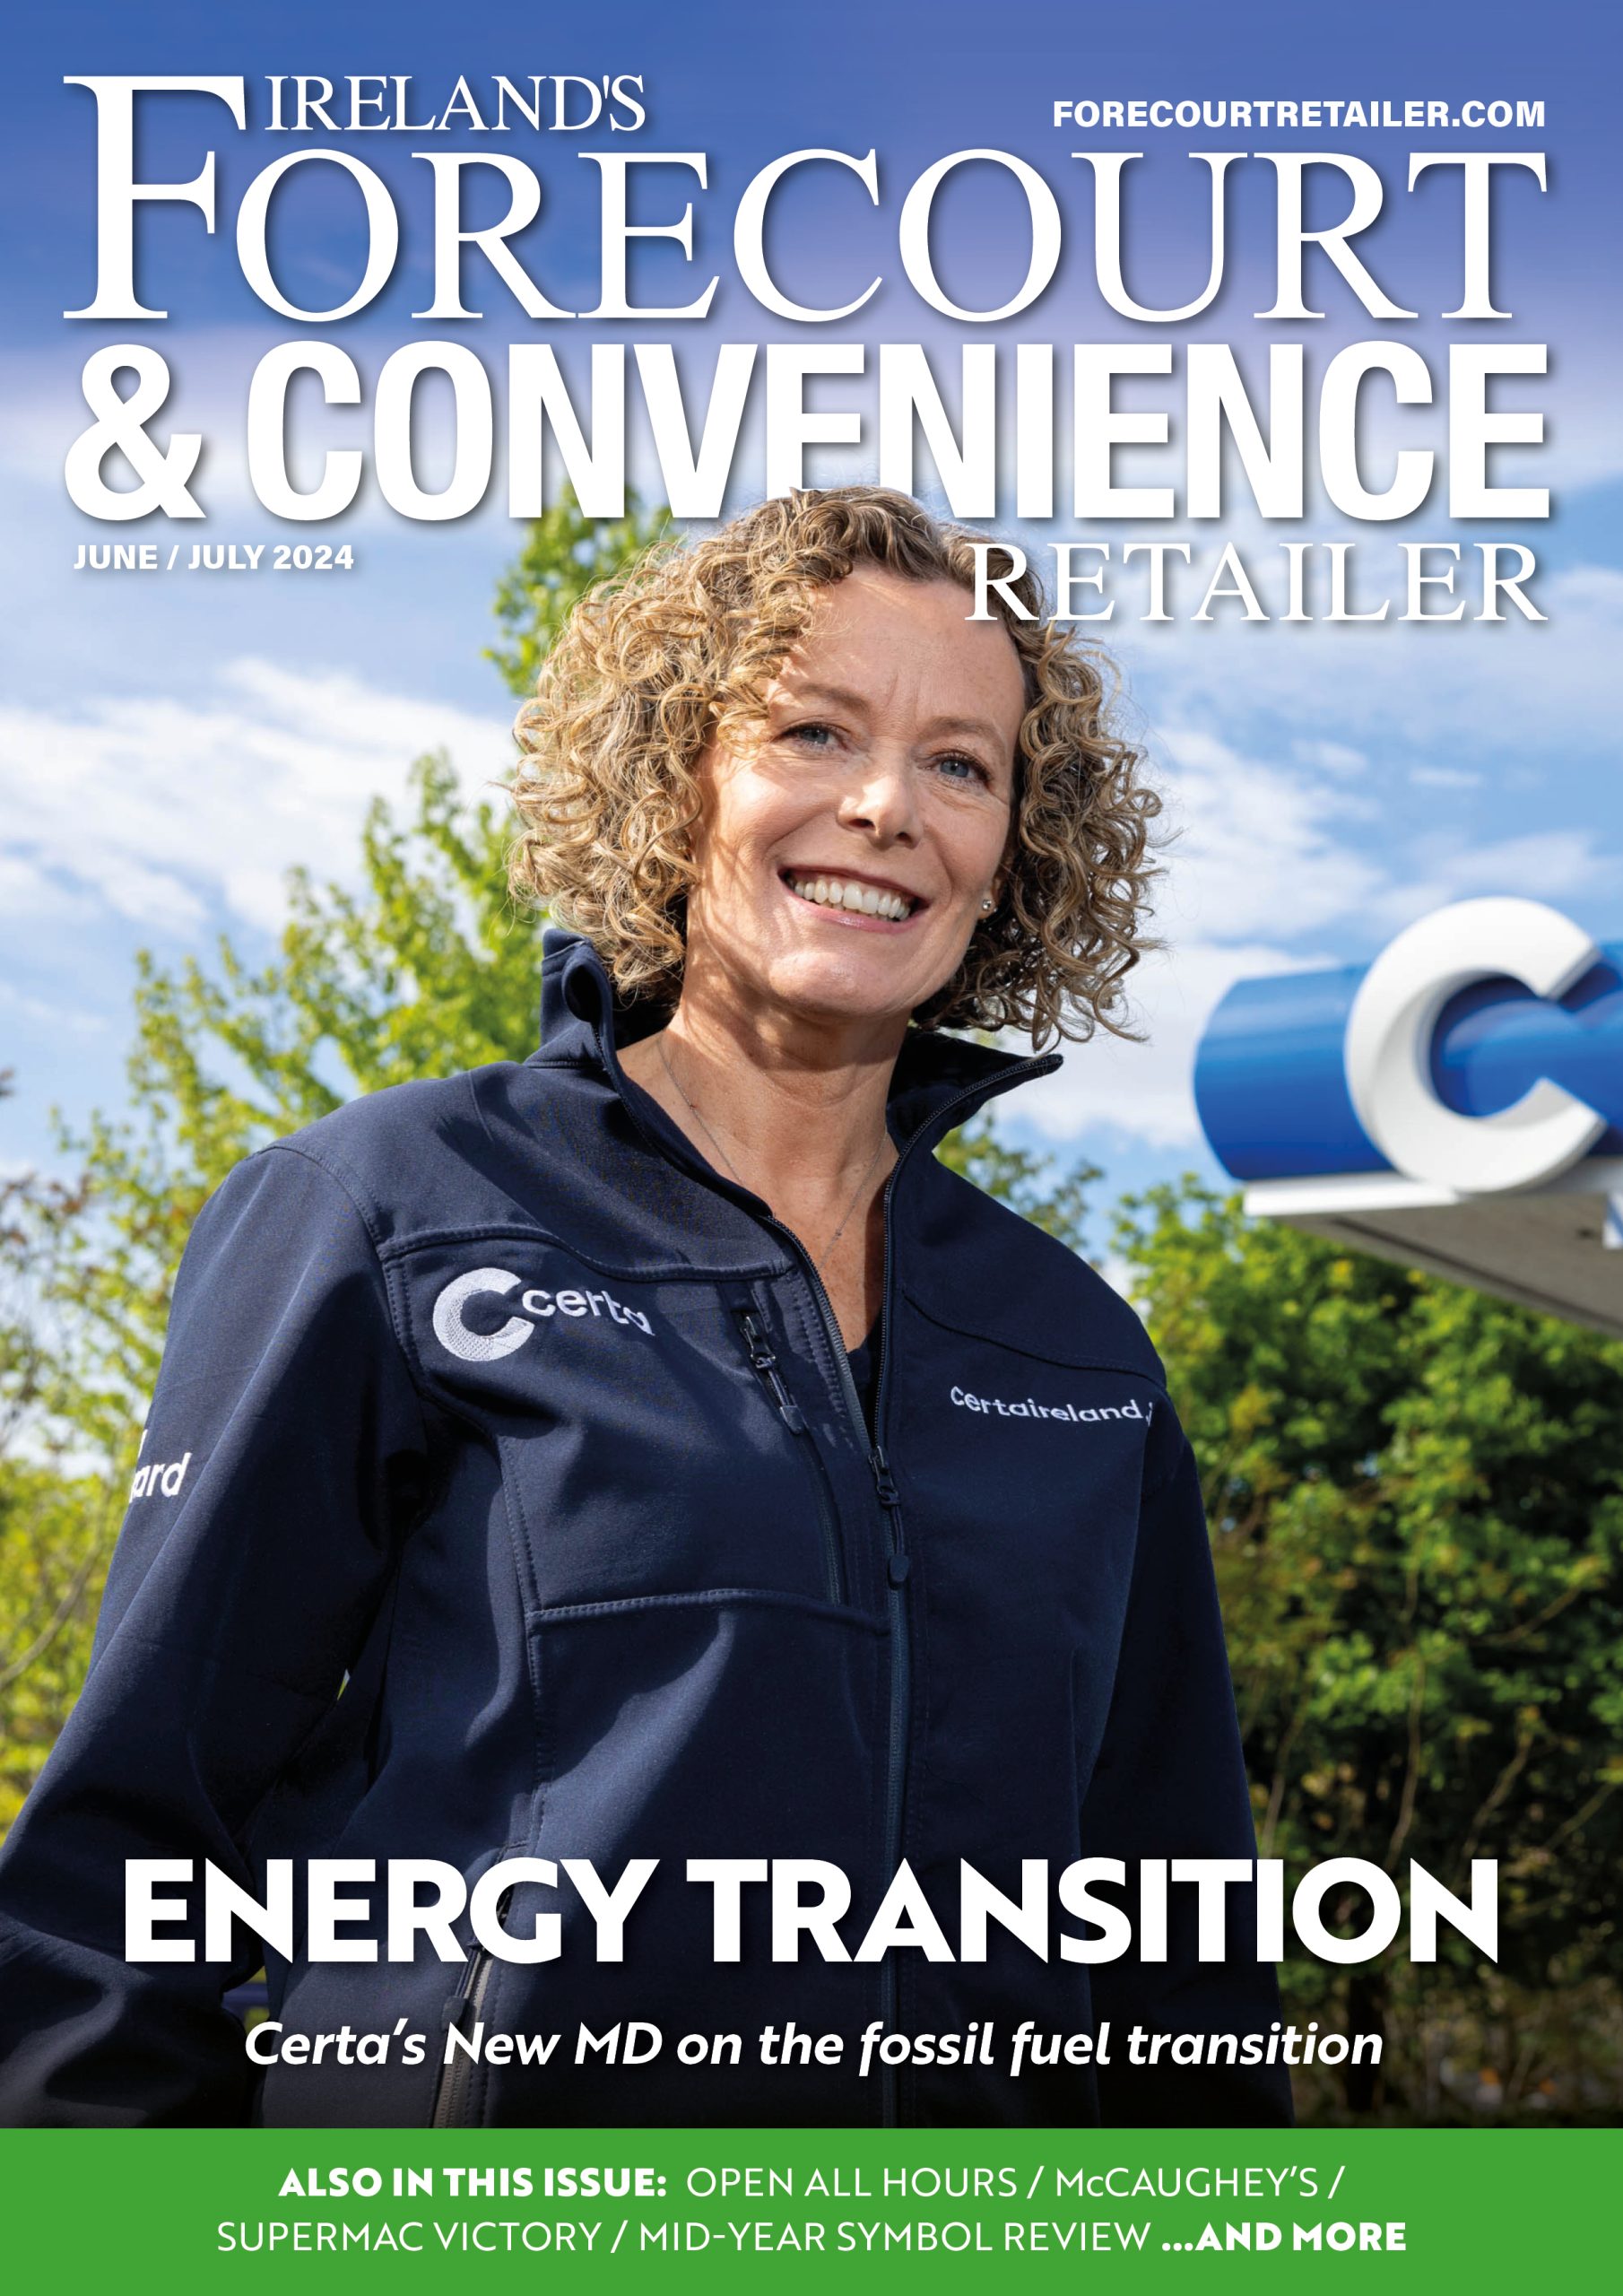 Ireland’s Forecourt & Convenience Retailer – Out Now!